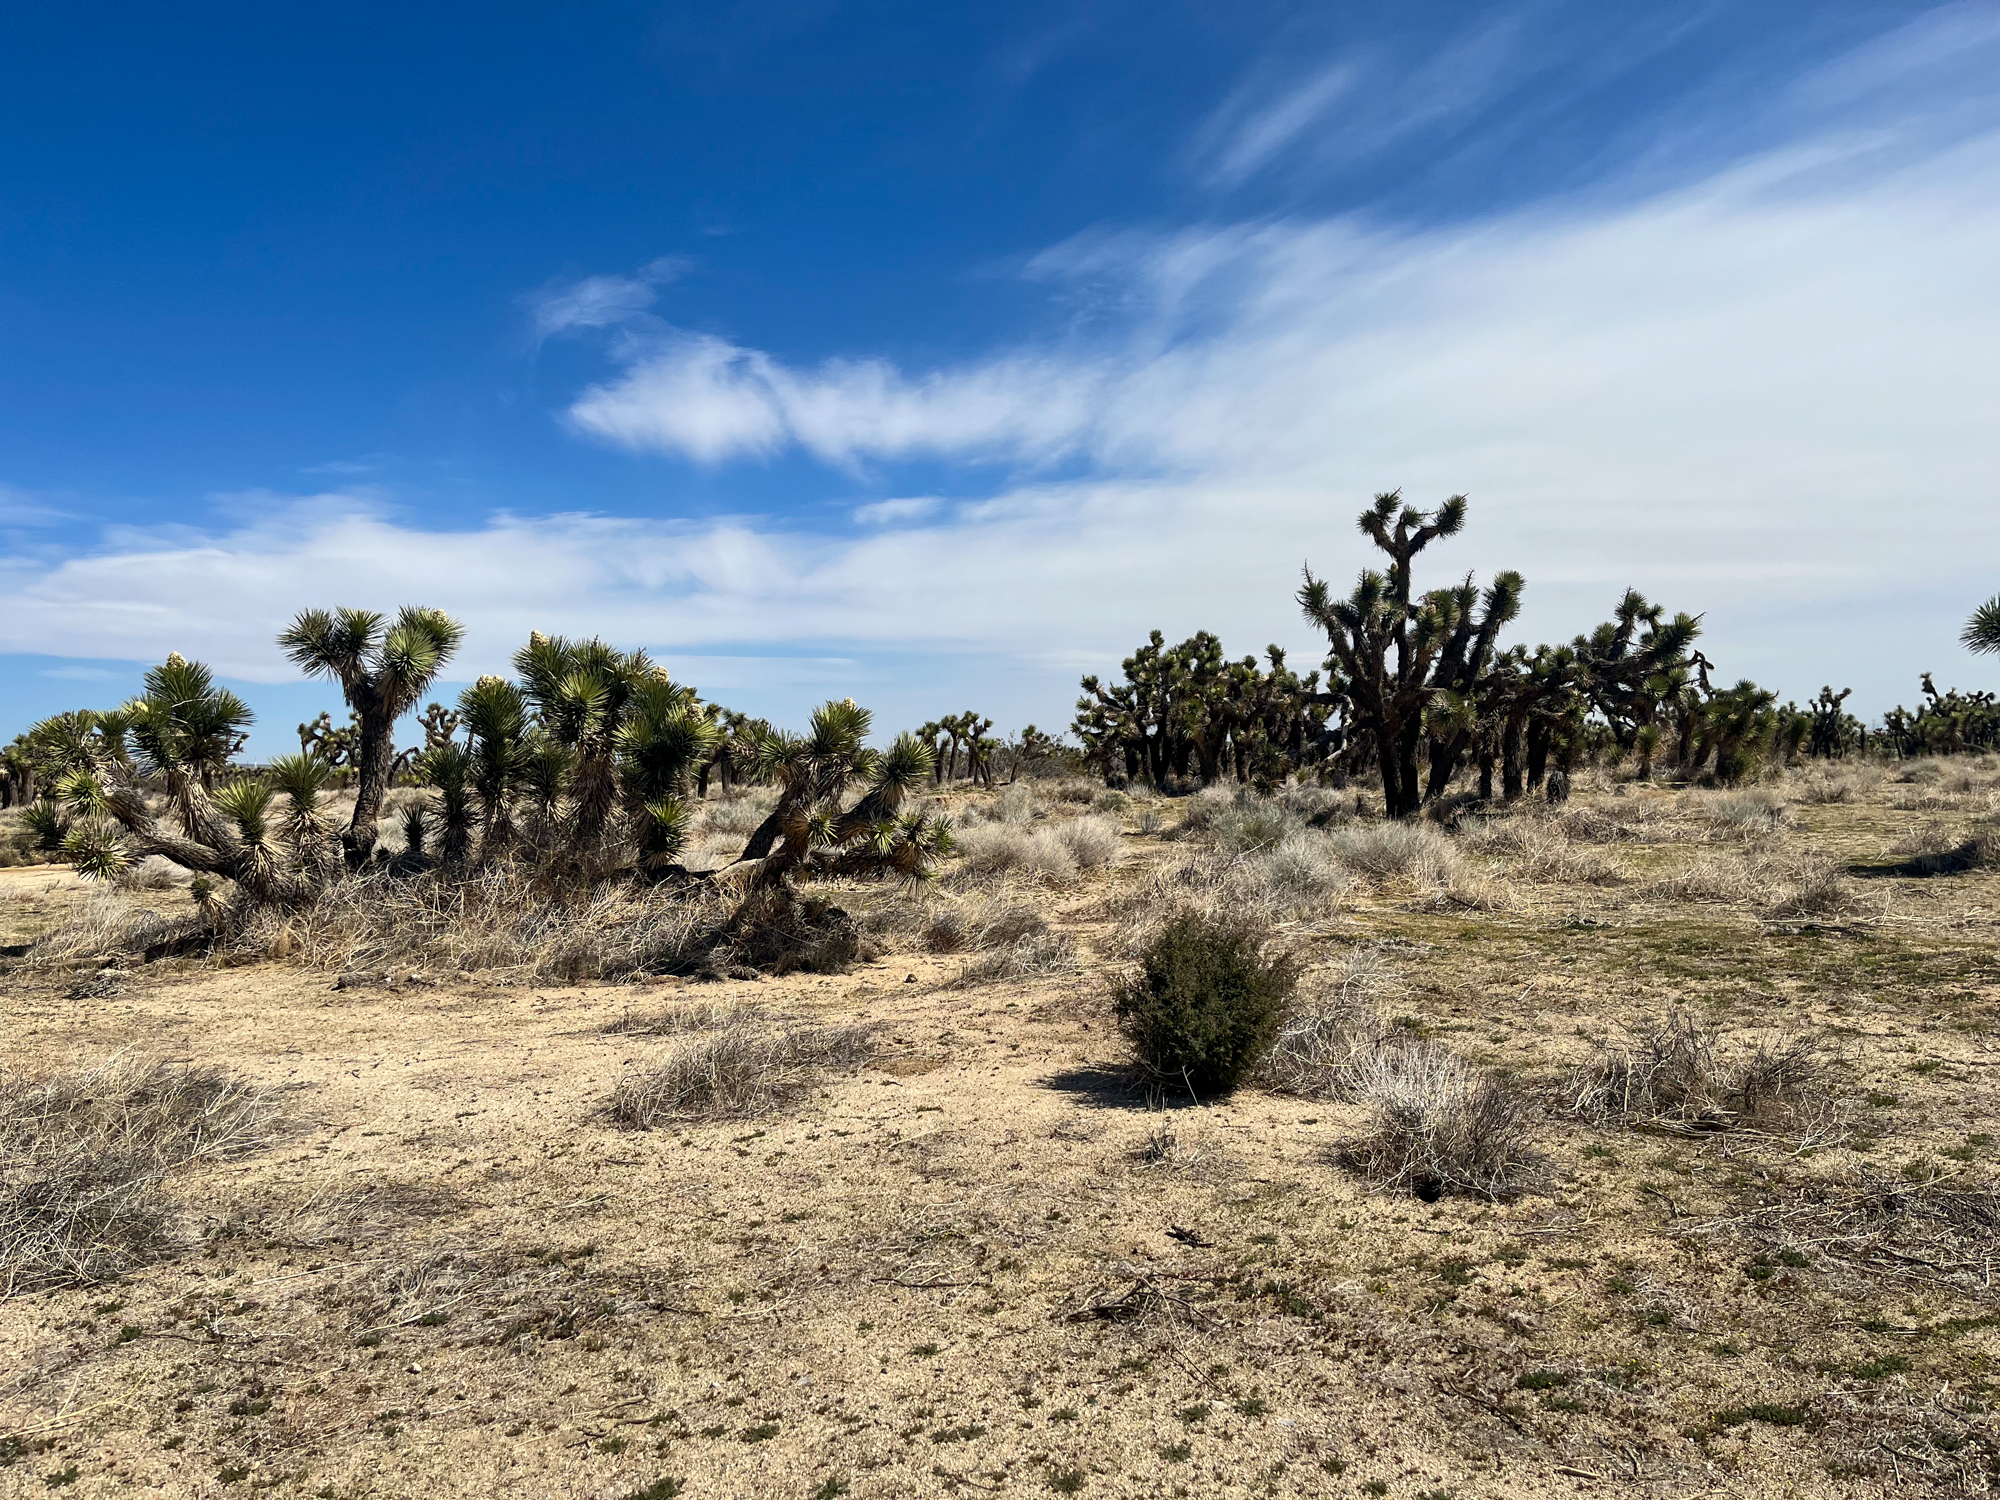 Joshua Trees near where human remains were discovered outside Los Angeles.